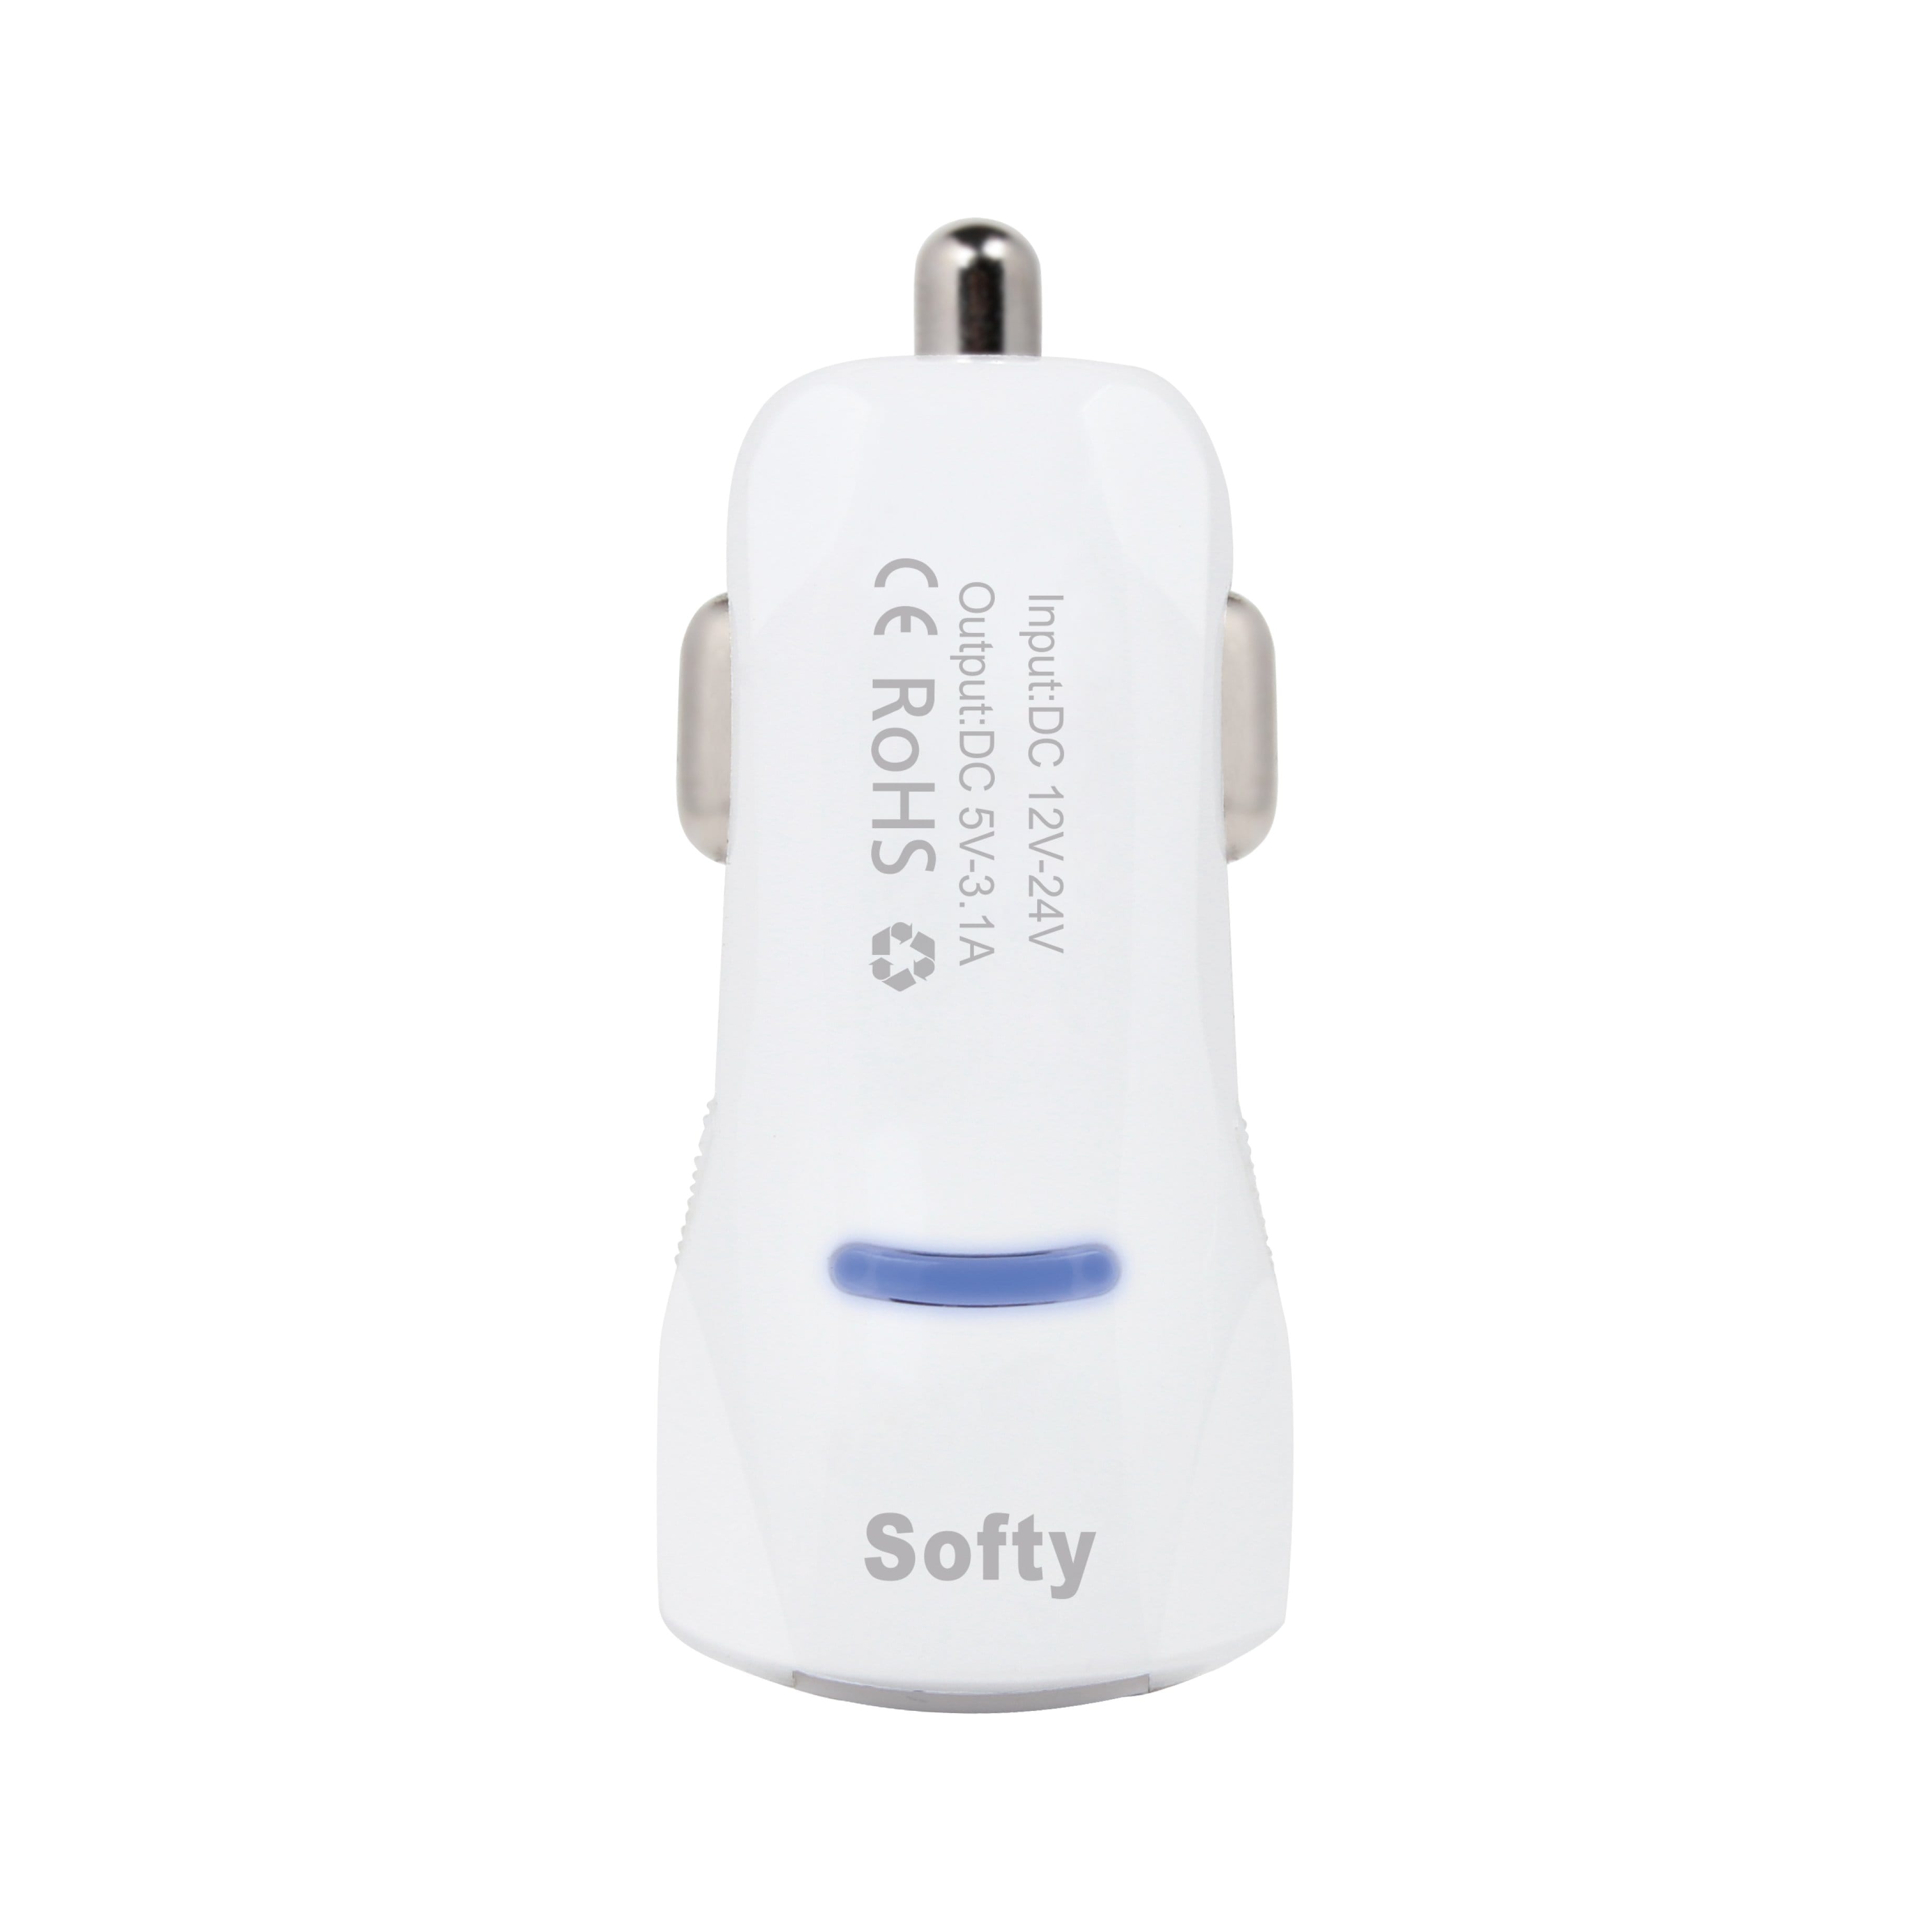 Softy premium quality 3.1amp Dual USB car charger-USB CAR CHARGERS-dealsplant